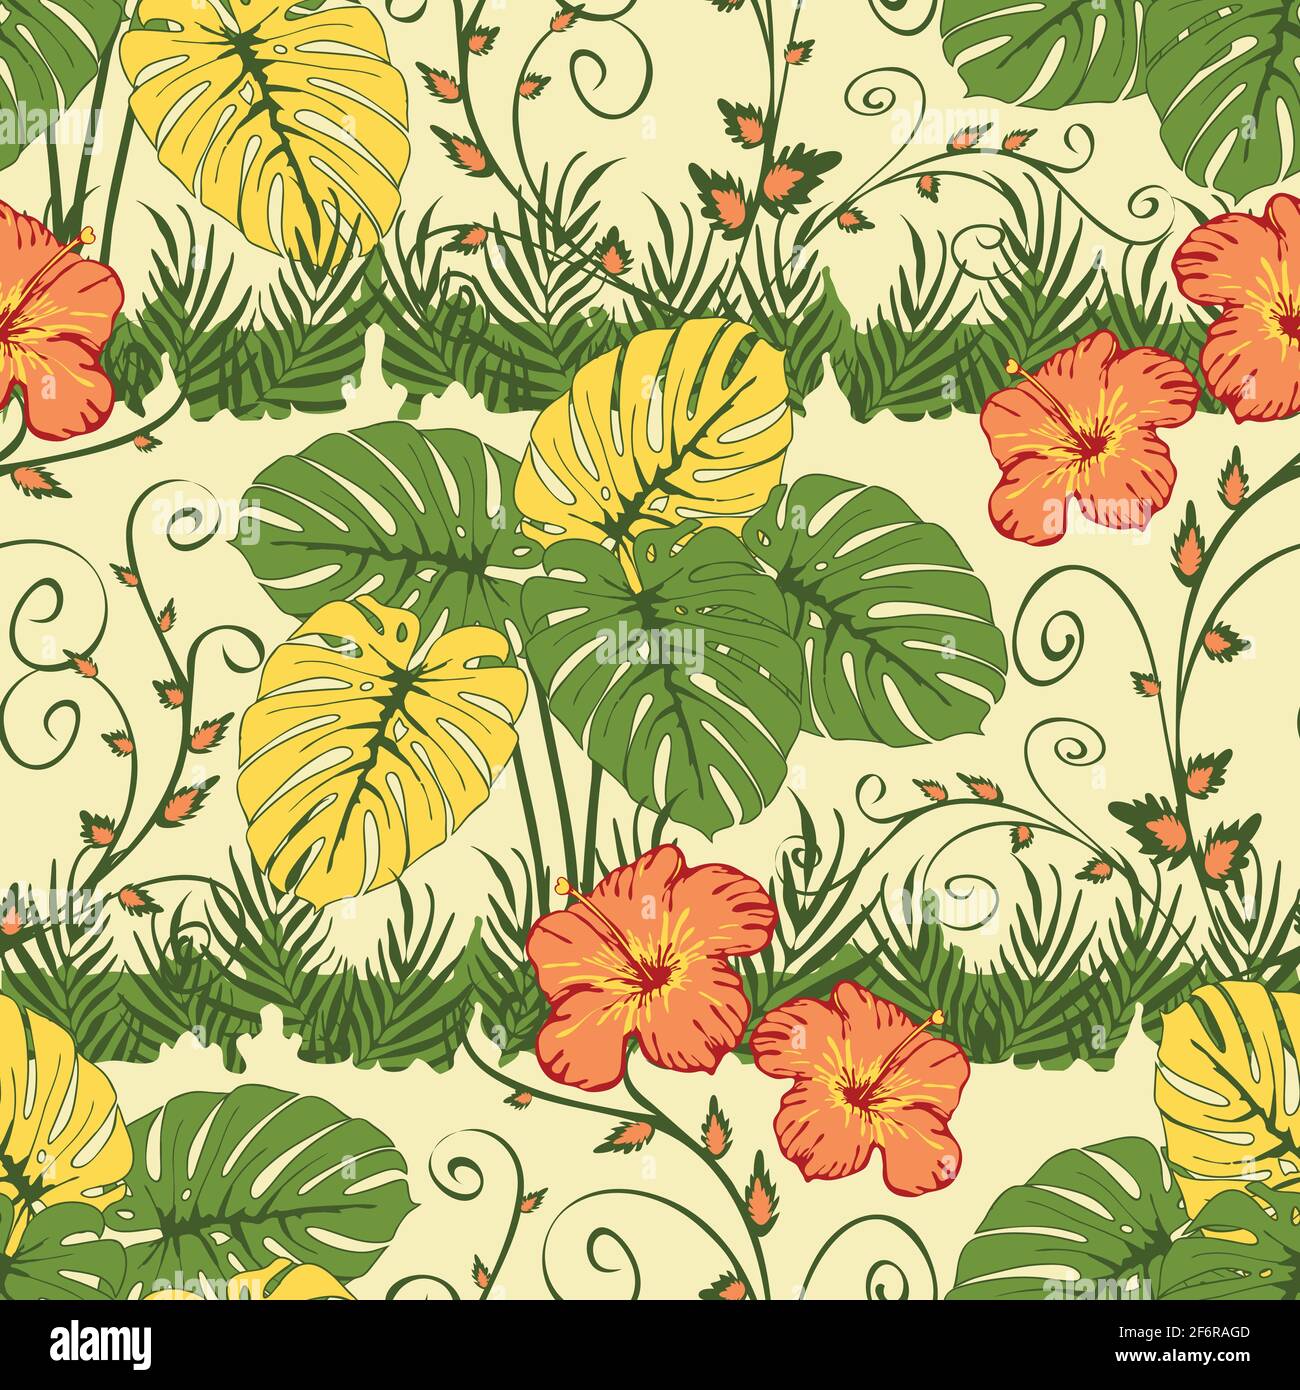 Seamless Vector Pattern With Tropical Plants On Light Pink Background Jungle Landscape Wallpaper Design With Red Flower Romantic California Fashion Stock Vector Image Art Alamy